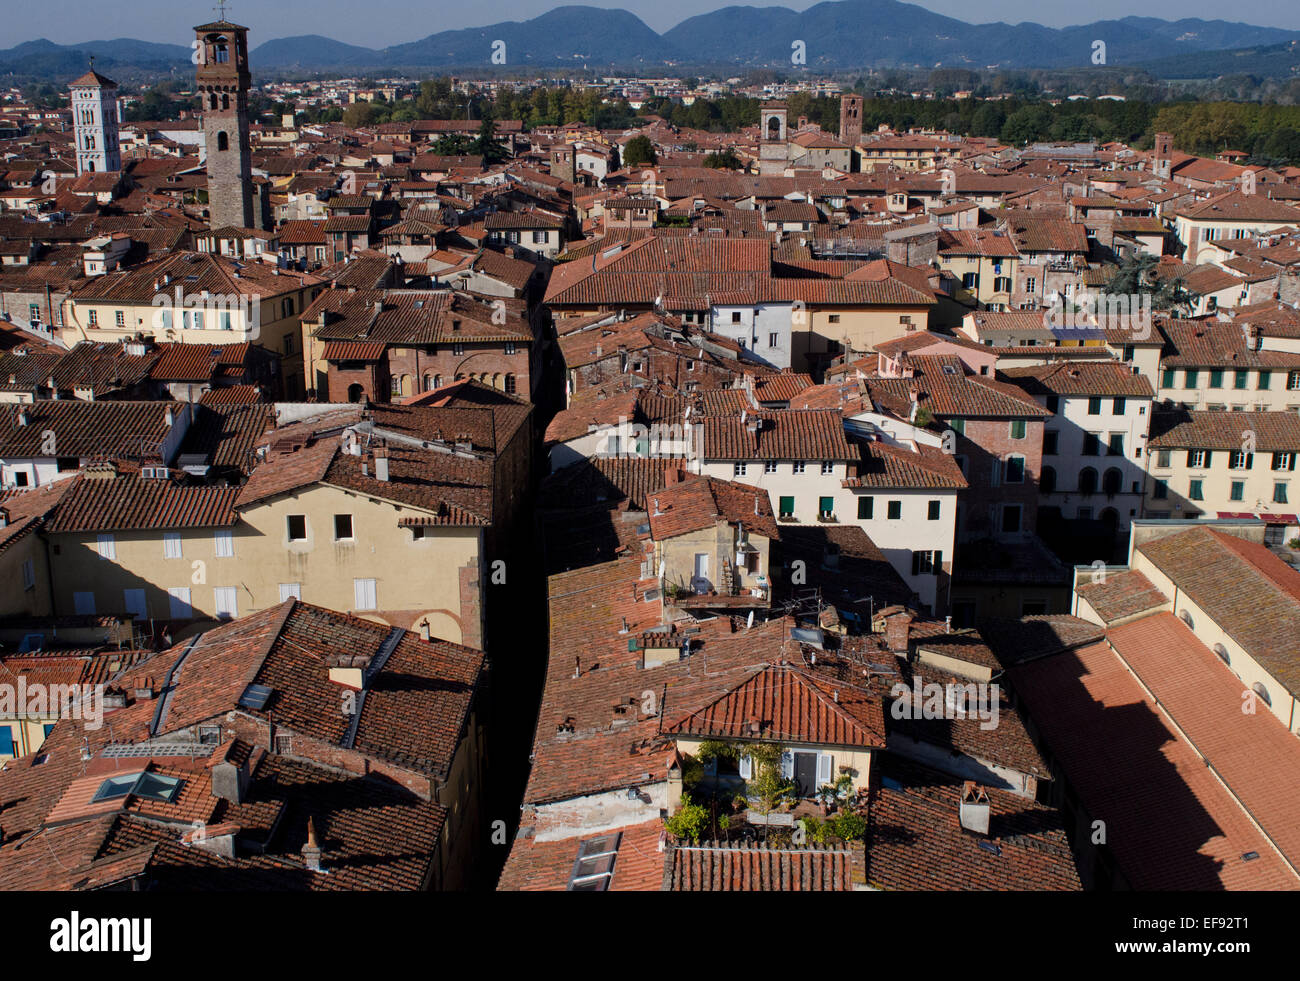 View from the top of the Guinigi tower in Lucca, Tuscany, Italy Stock Photo